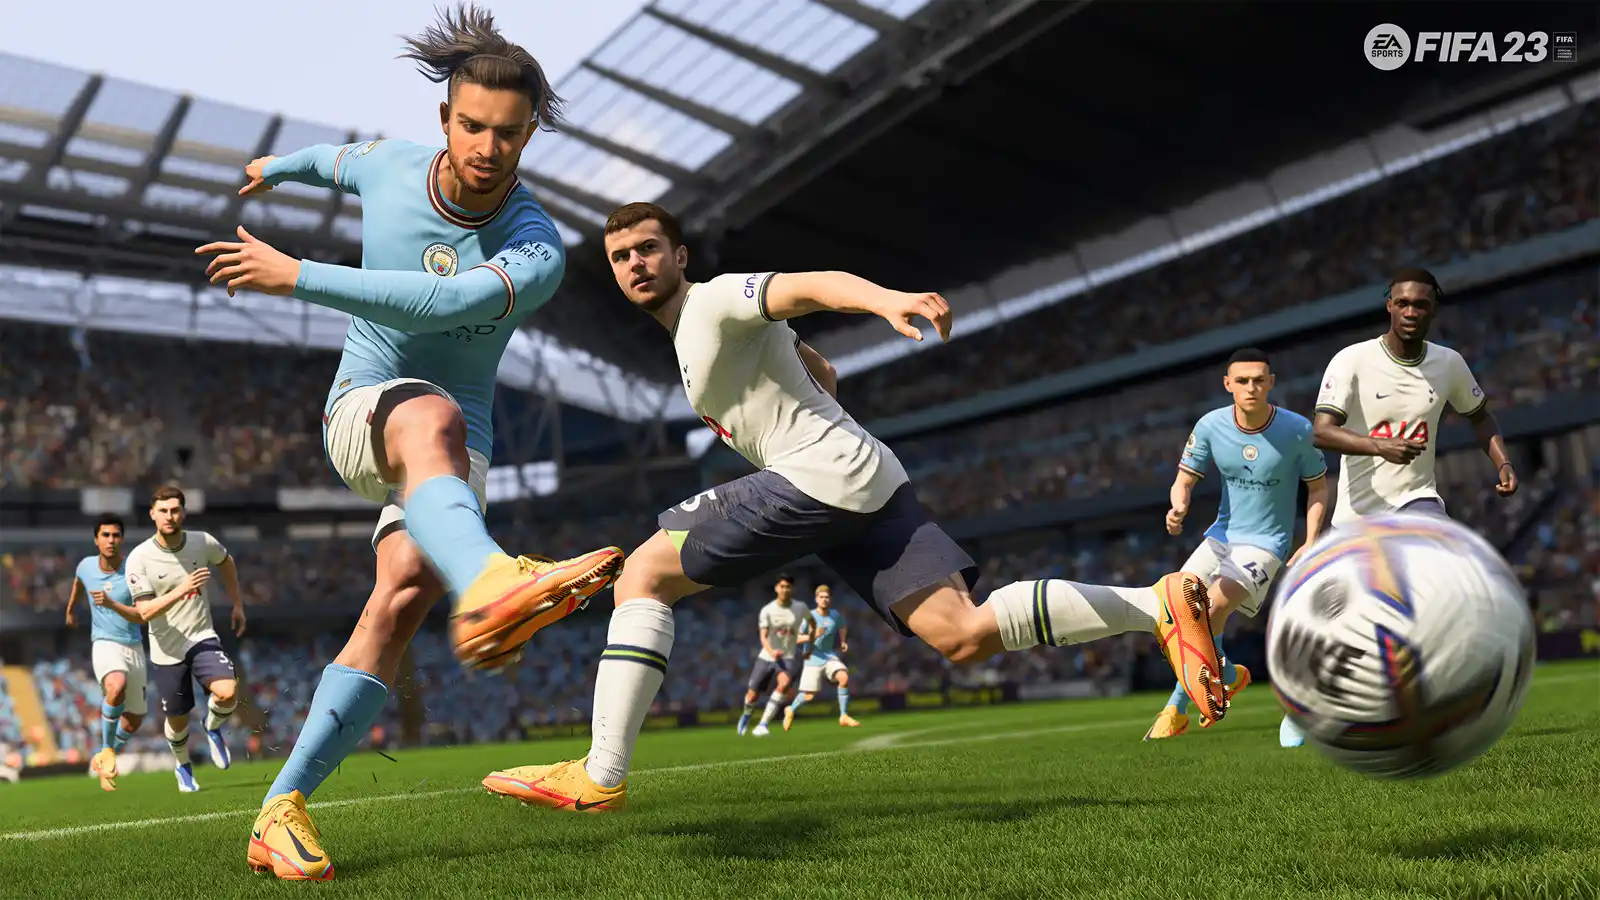 FIFA 23 Screenshots - All the Official FIFA 23 Images